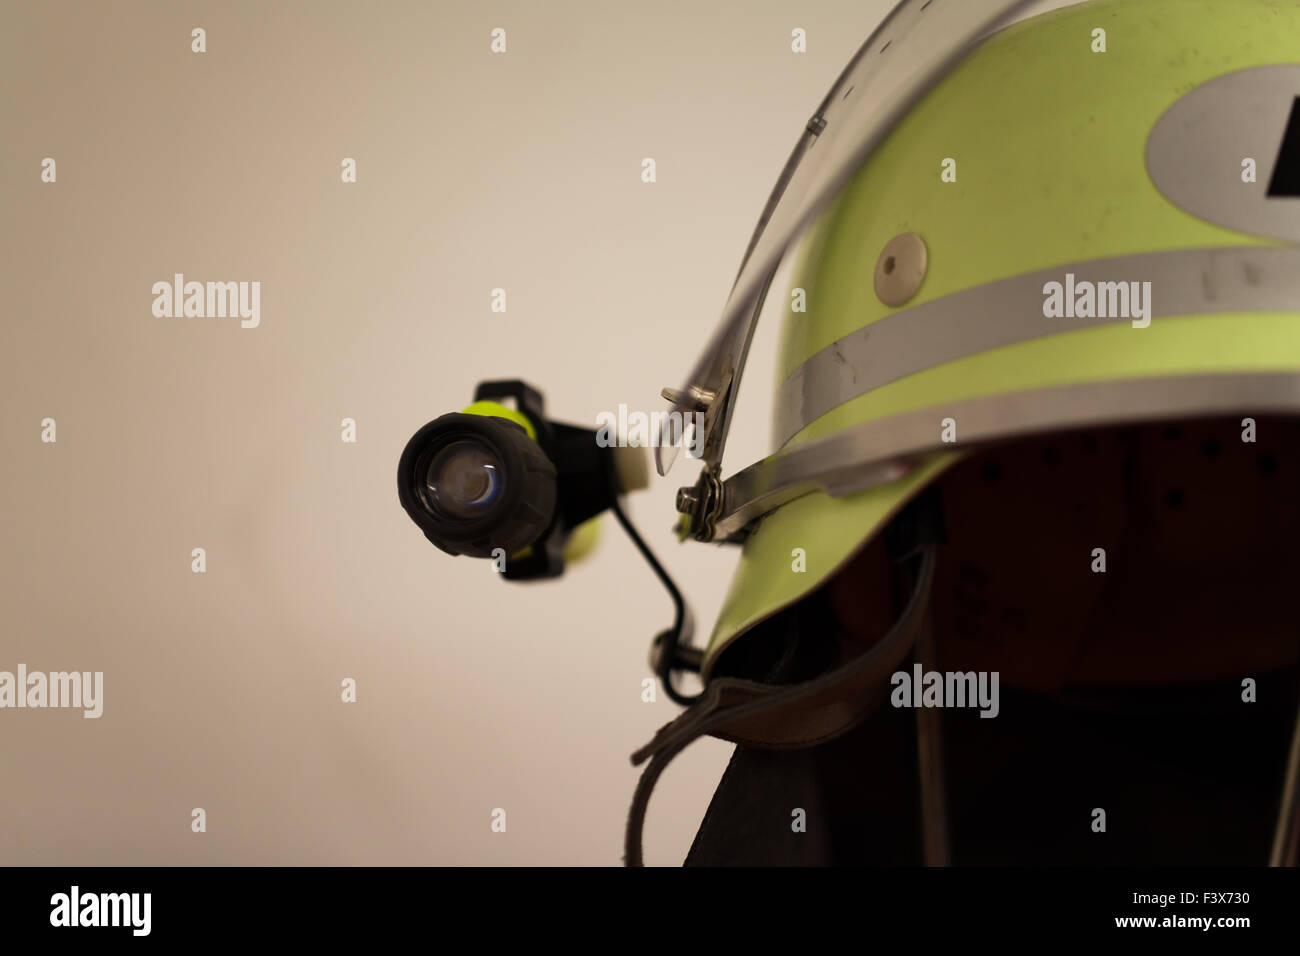 Fire Department firefighter helmet with lamp Stock Photo